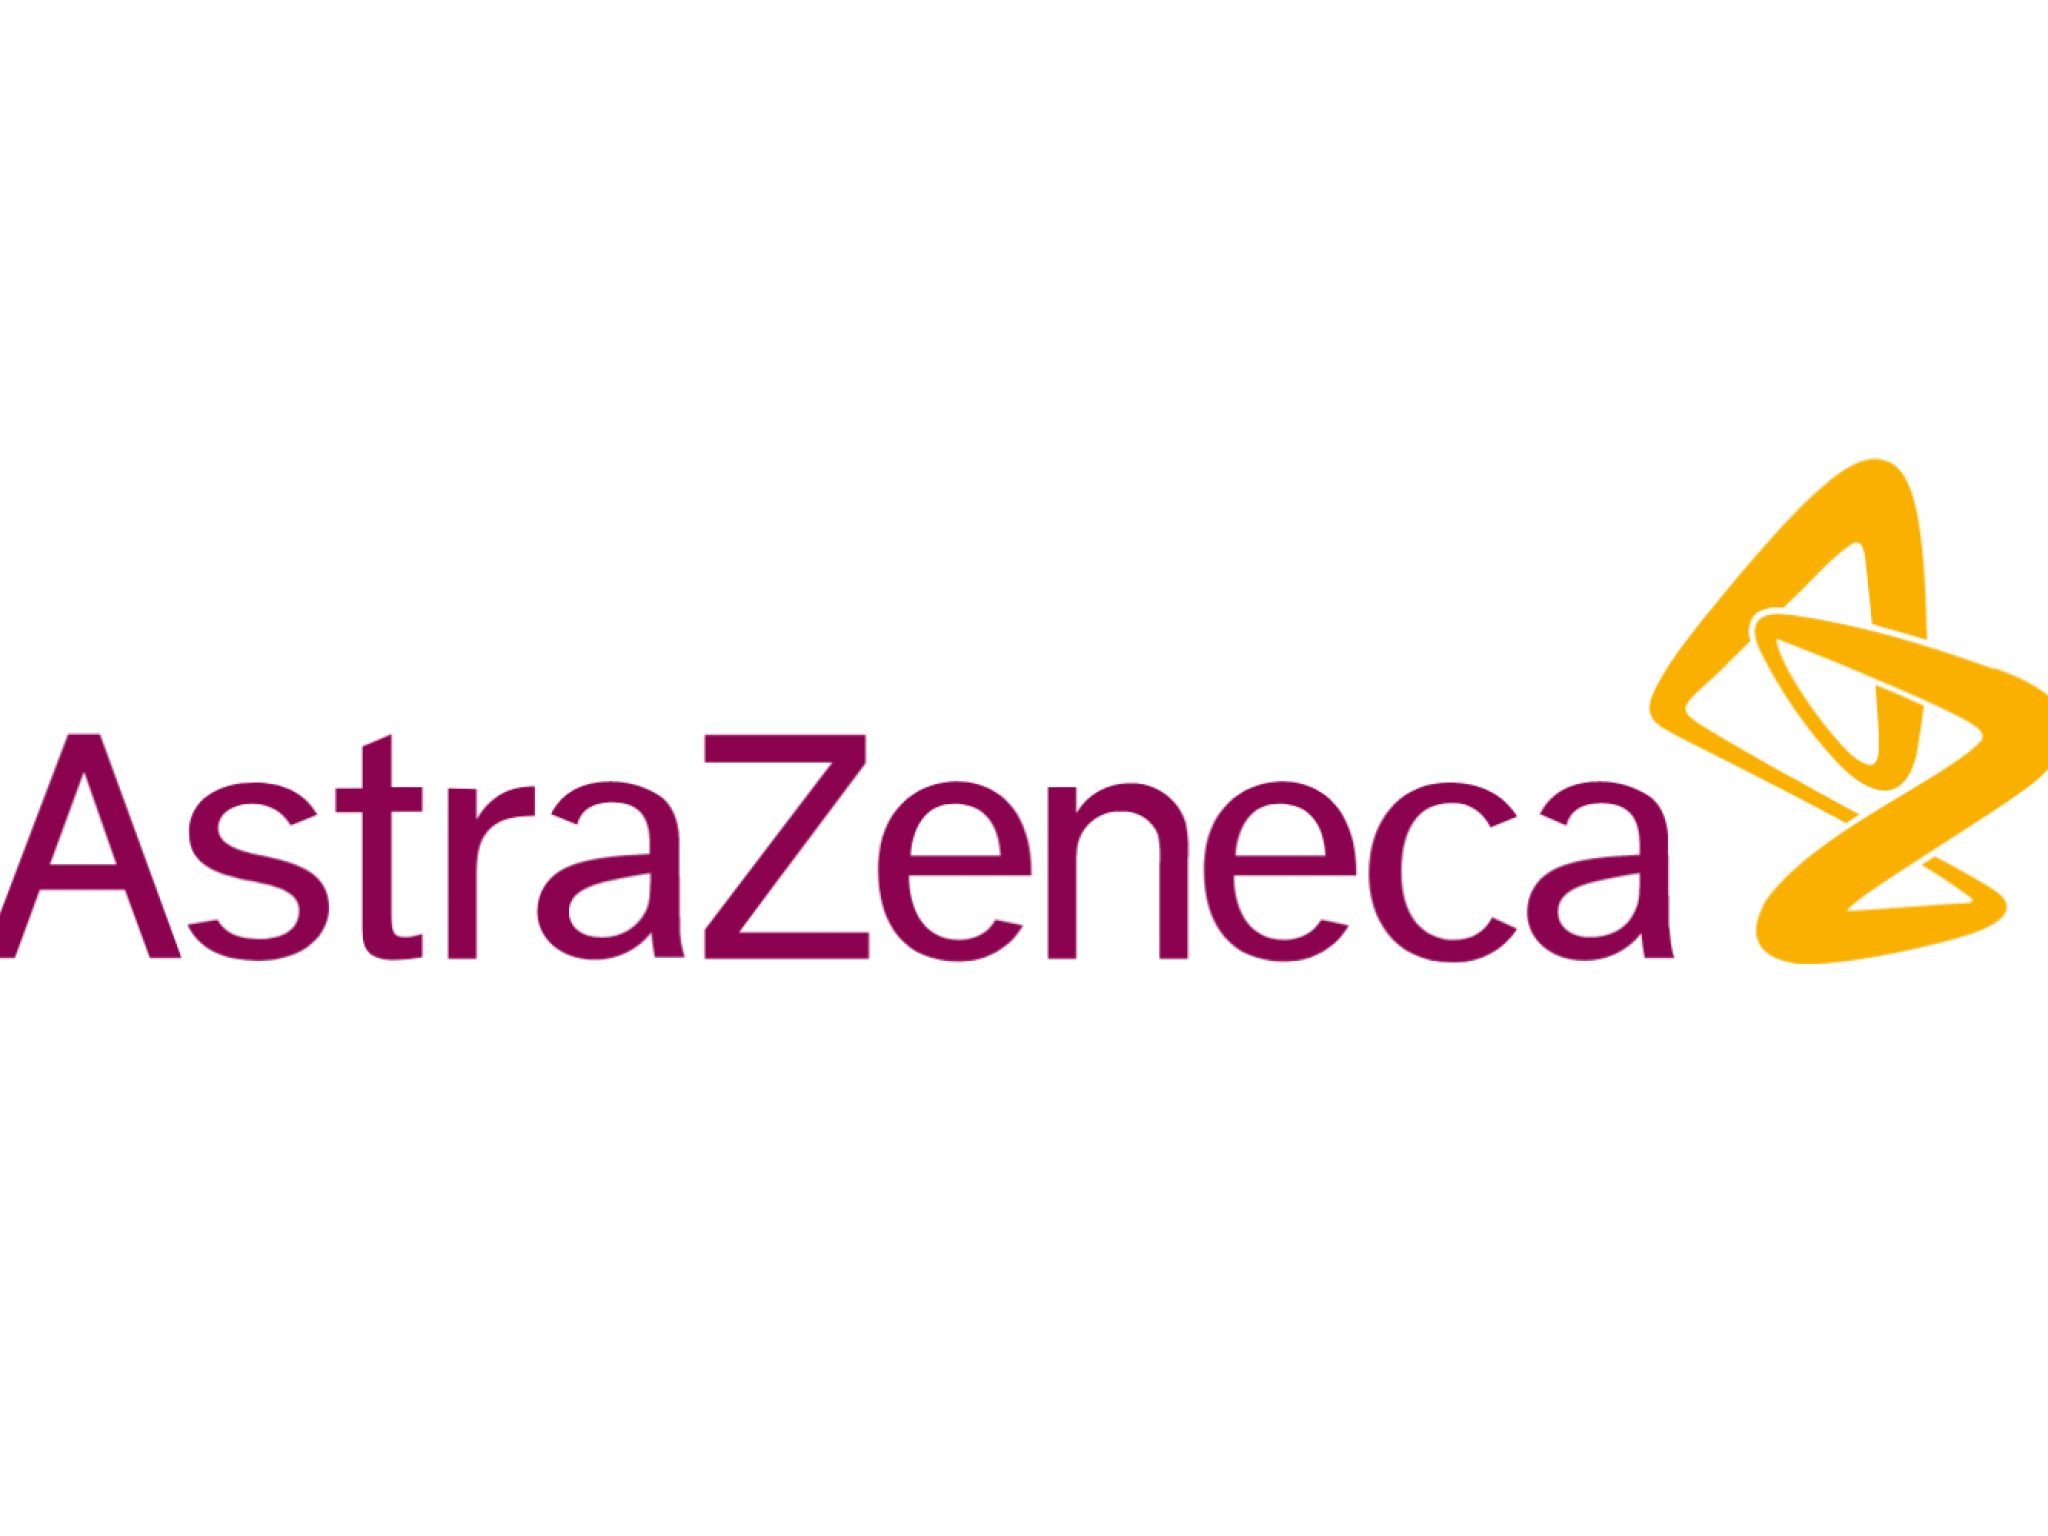  astrazeneca-inks-over-2b-agreement-for-cell-therapies-targeting-diabetes 